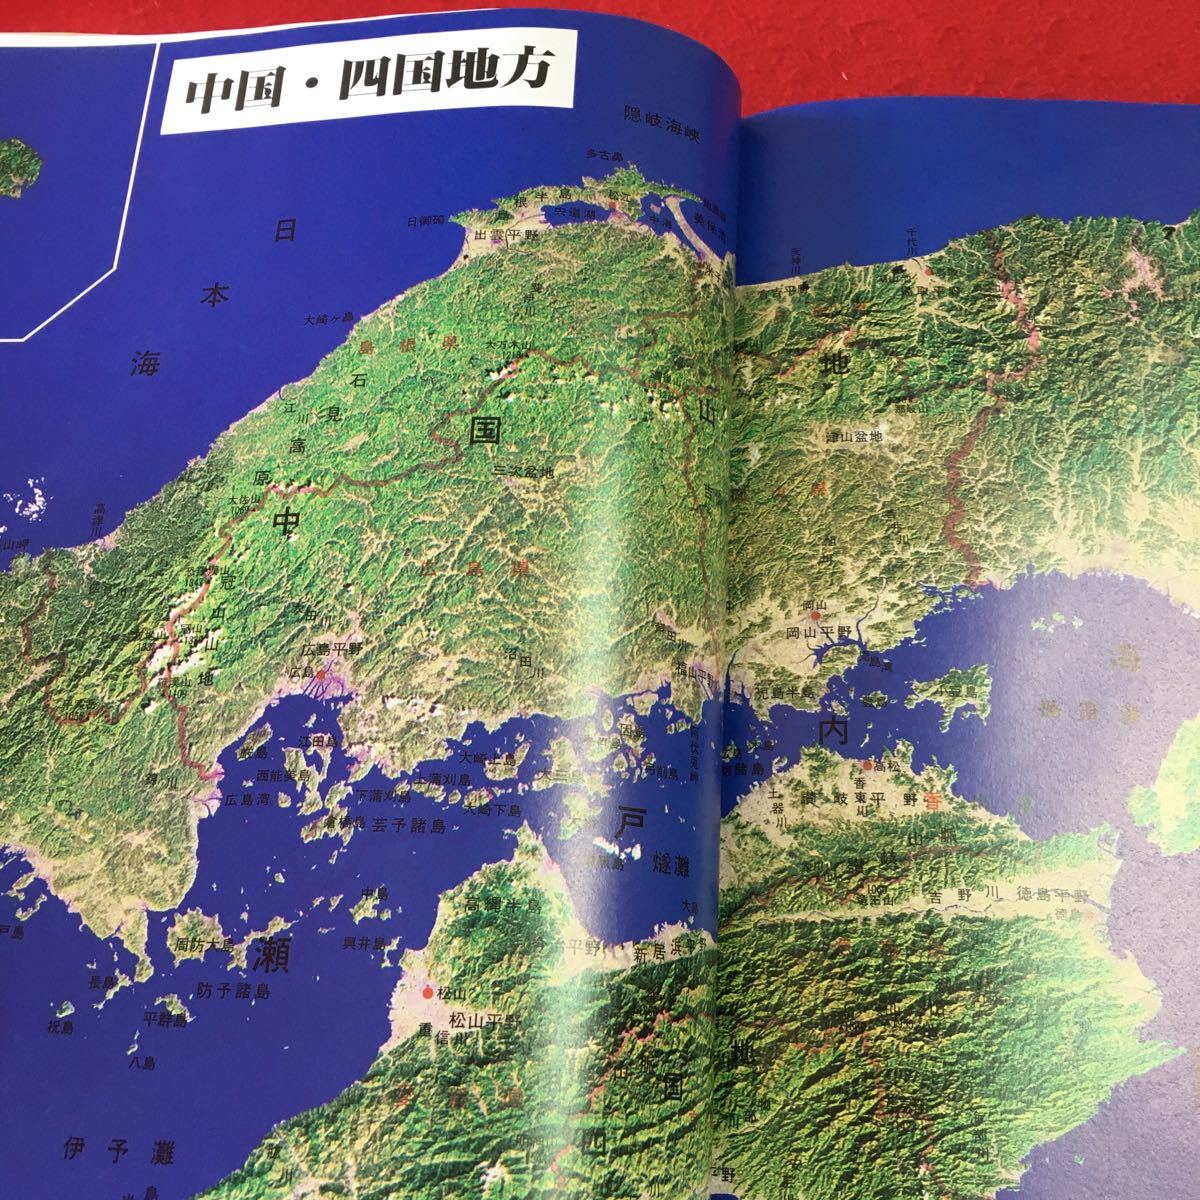 m4^-010 Japan row island large map pavilion compilation person ... Hara 1990 year 12 month 20 day the first version no. 1. issue Shogakukan Inc. all country map materials Japan row island Hokkaido Tohoku district Kanto district 